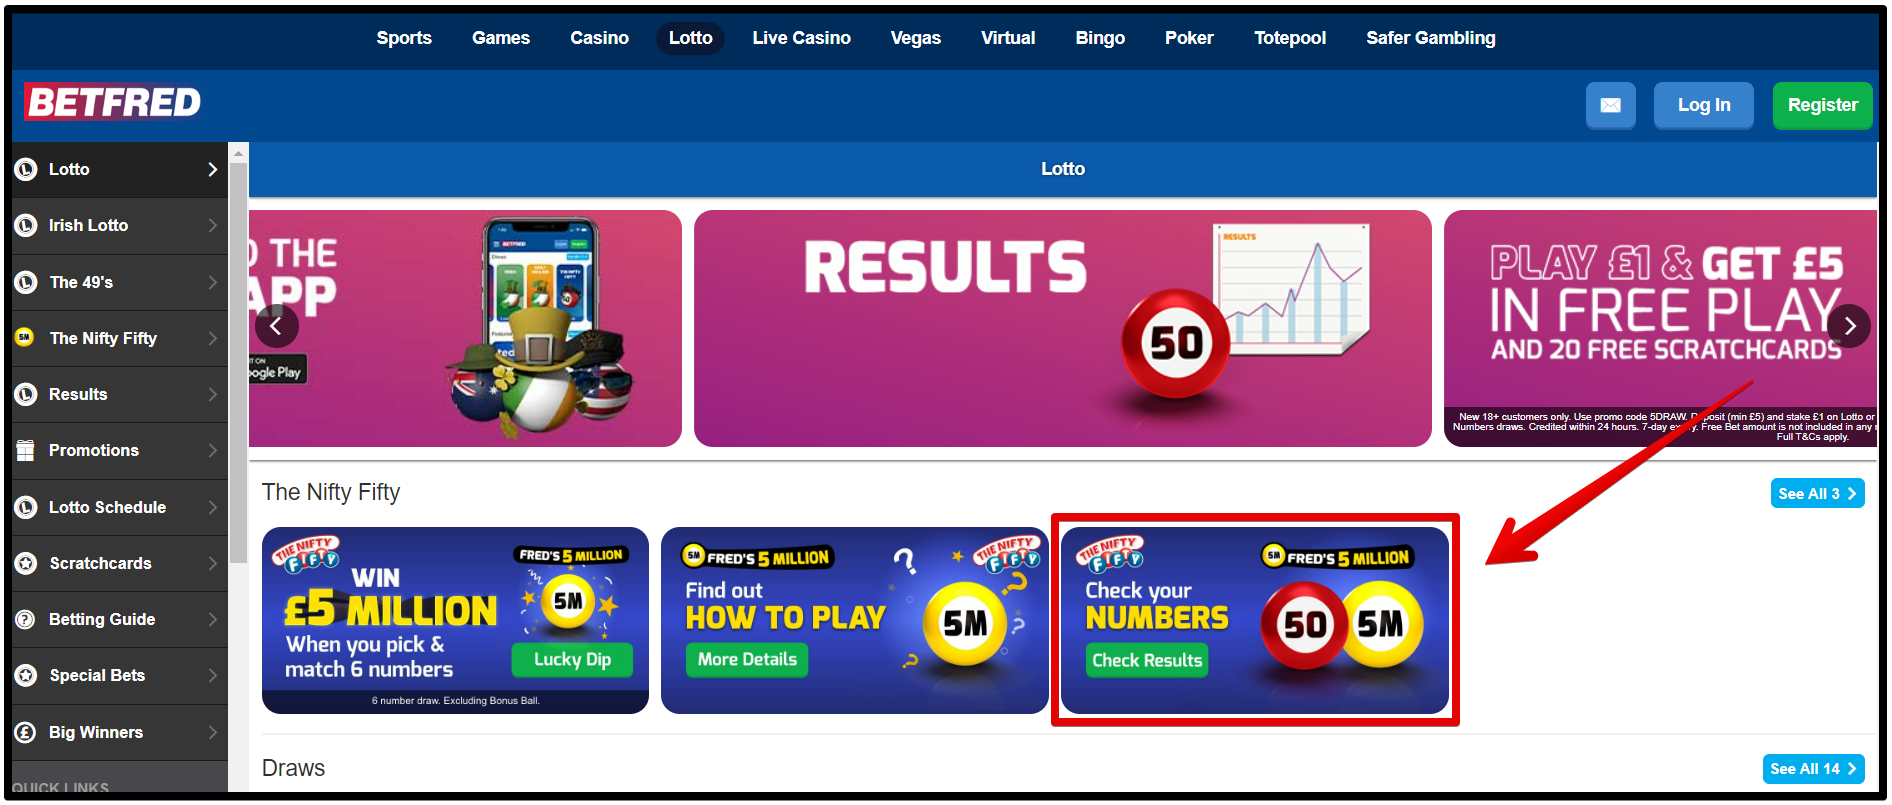 Betfred publish the official lottery results on their site